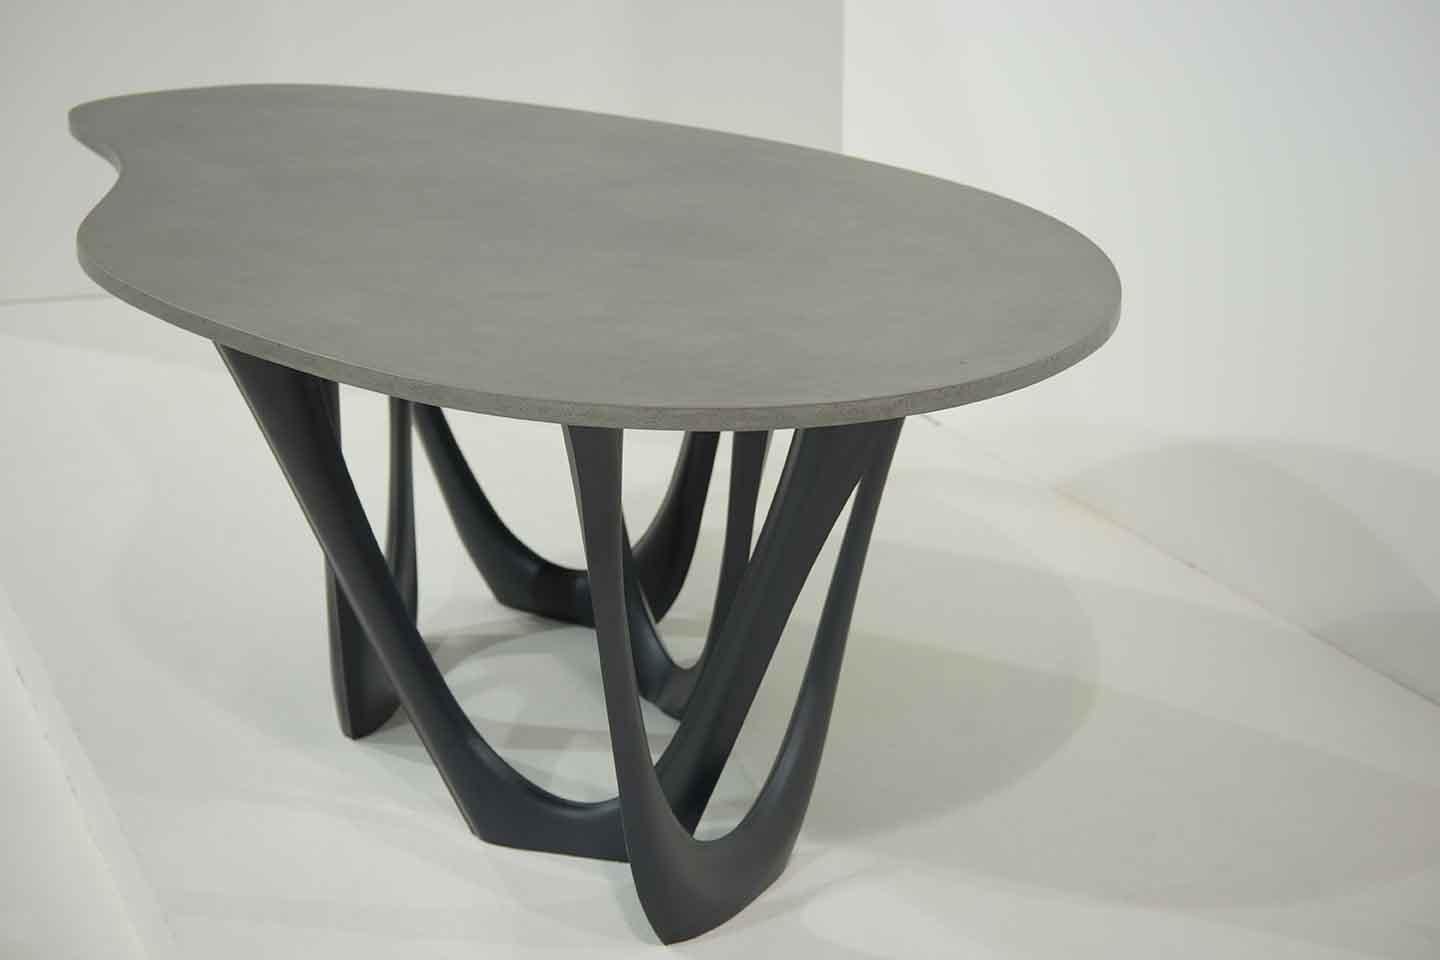 Black Glossy Concrete Steel Sculptural G-Table by Zieta For Sale 2